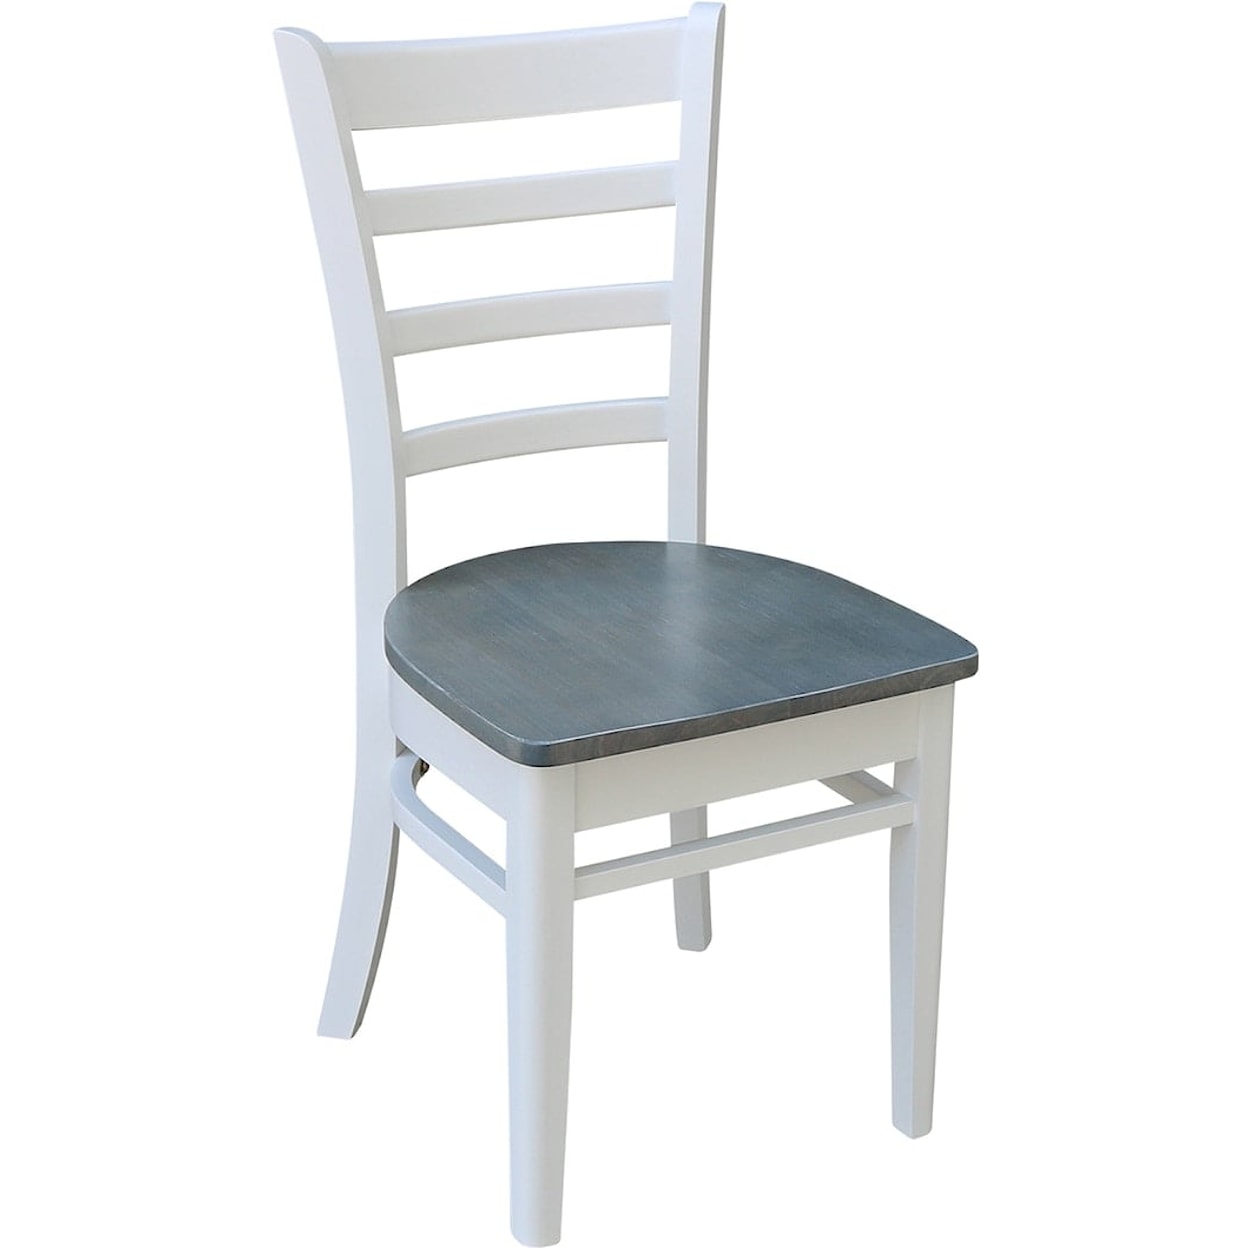 John Thomas Dining Essentials Emily Chair in Heather Gray/White